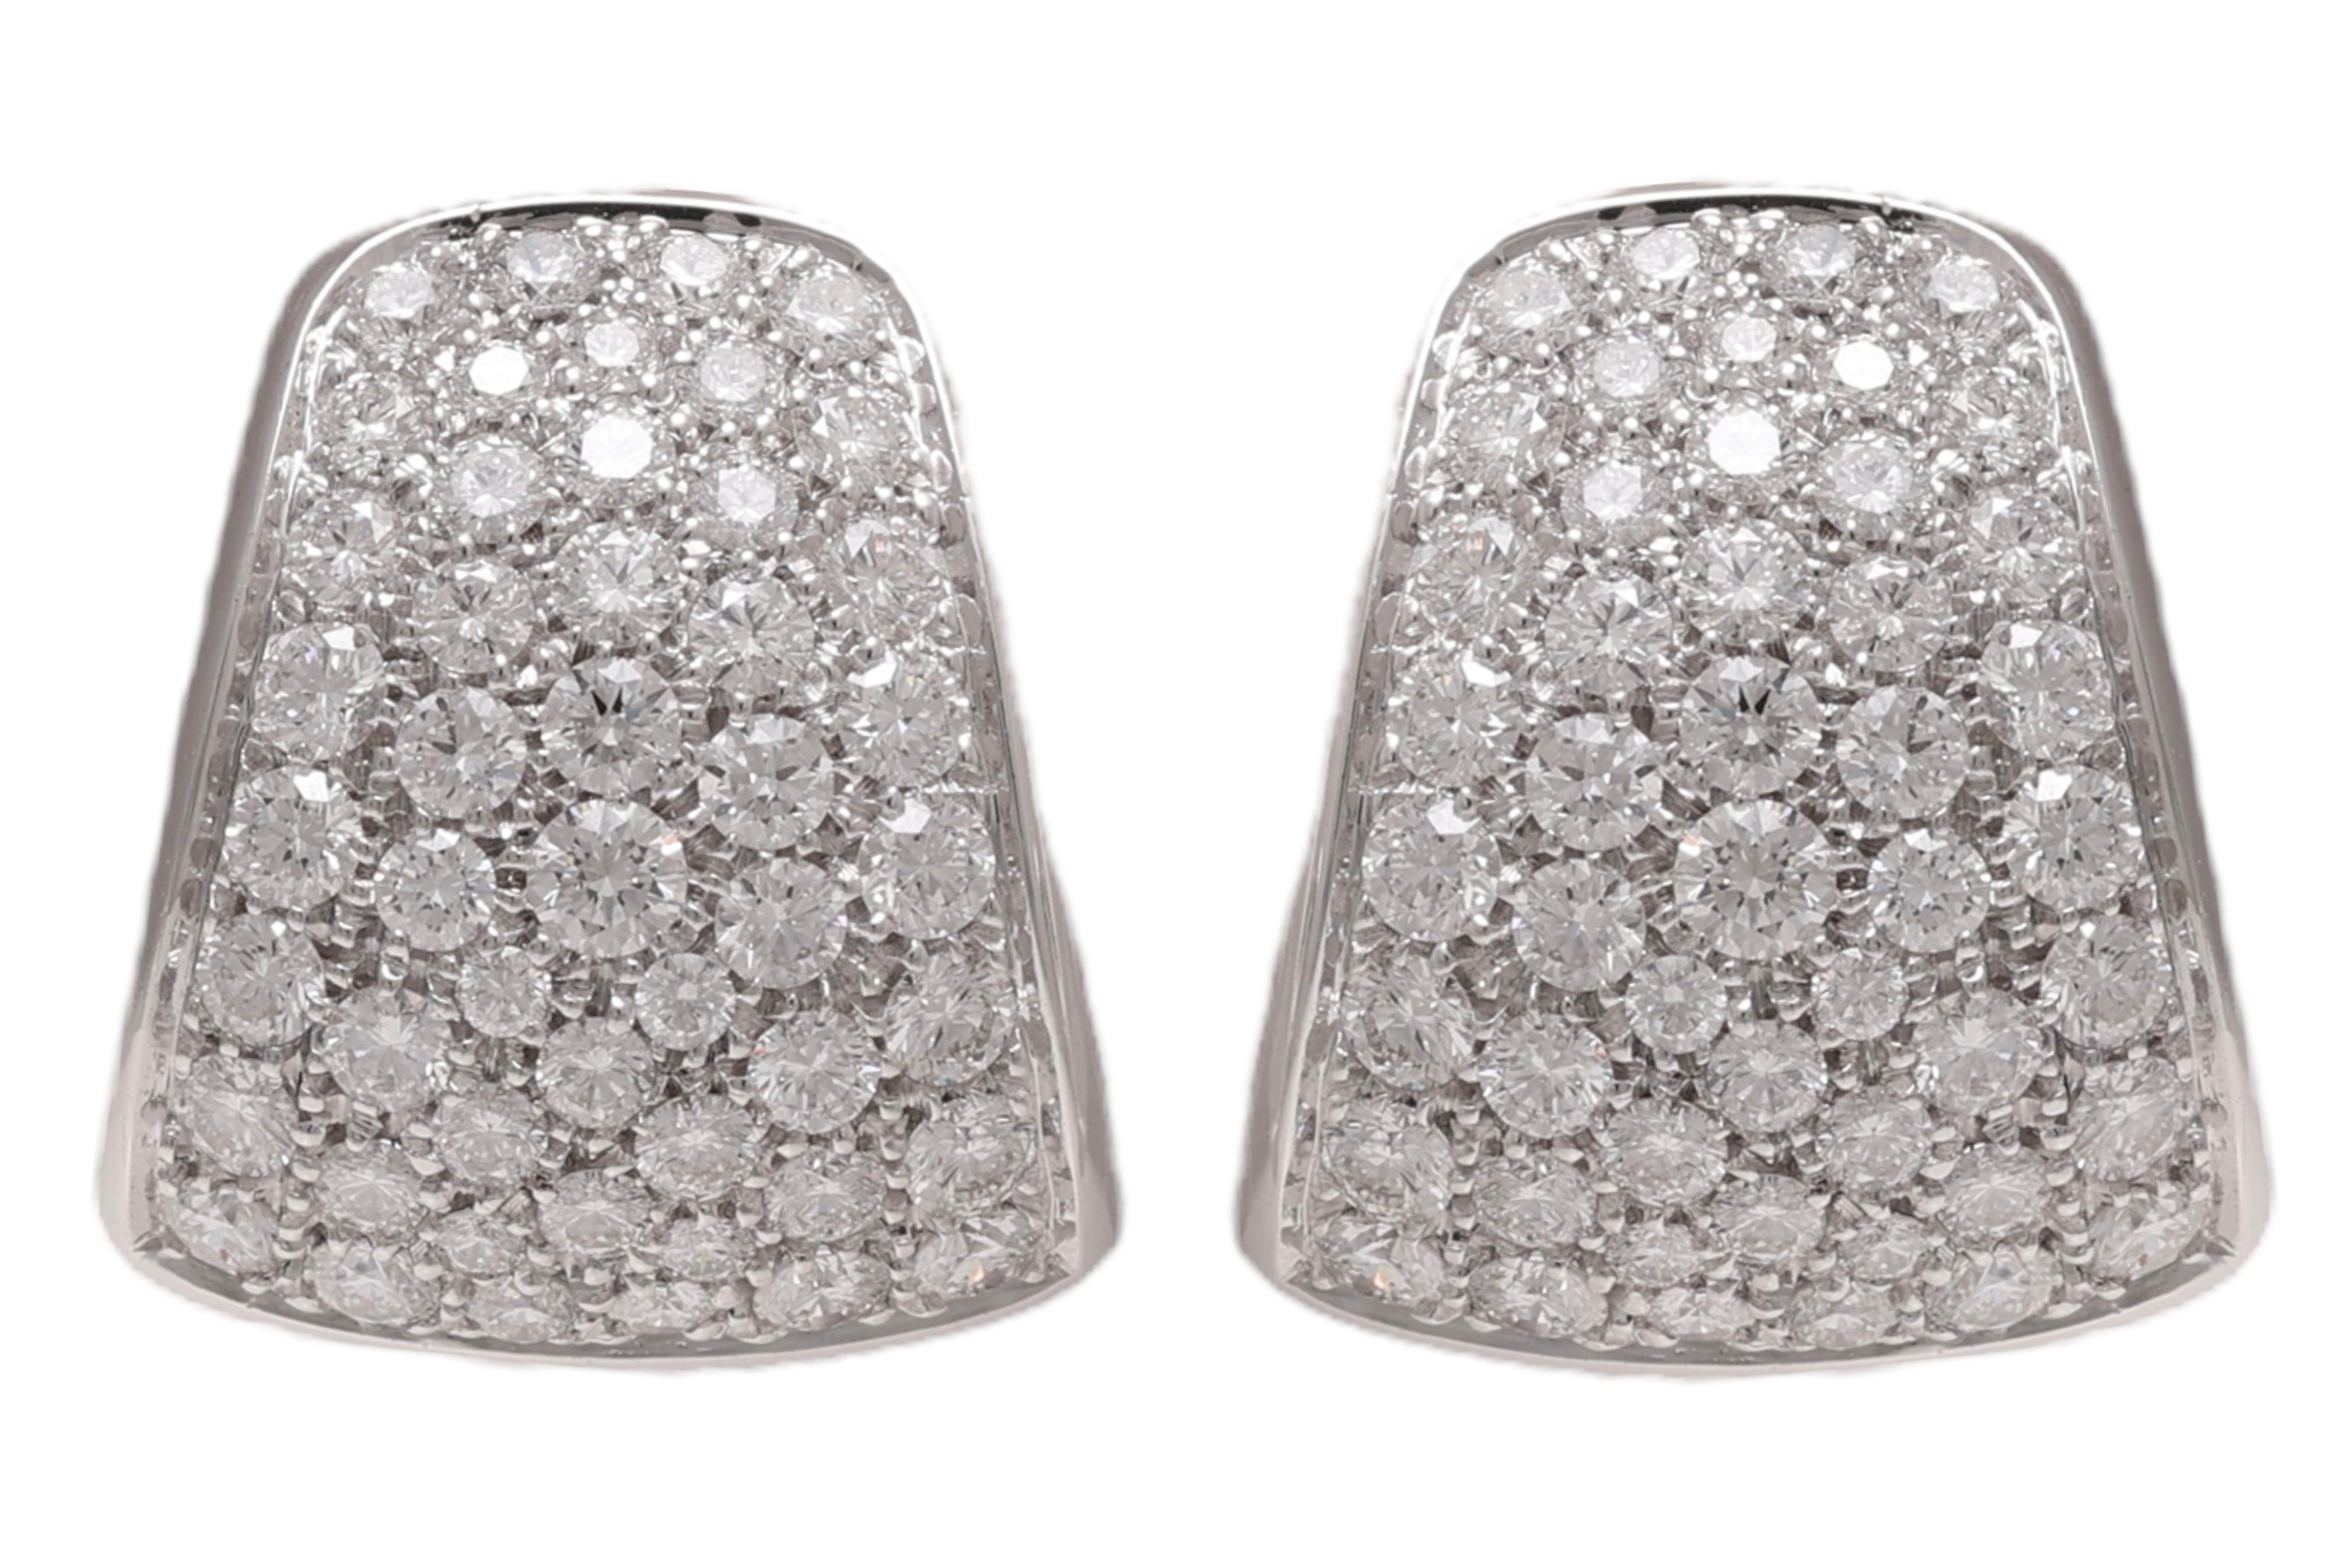 Gorgeous 18 kt. White Gold Clip On Earrings With 2.80 Ct. Brilliant Cut Diamonds

Diamonds: brilliant cut diamonds together 2.80 ct. G SI

Material: 18 kt. white gold

Measurements: 18.6 mm length x 16.0 mm wide x 15.4 mm total thickness

Total